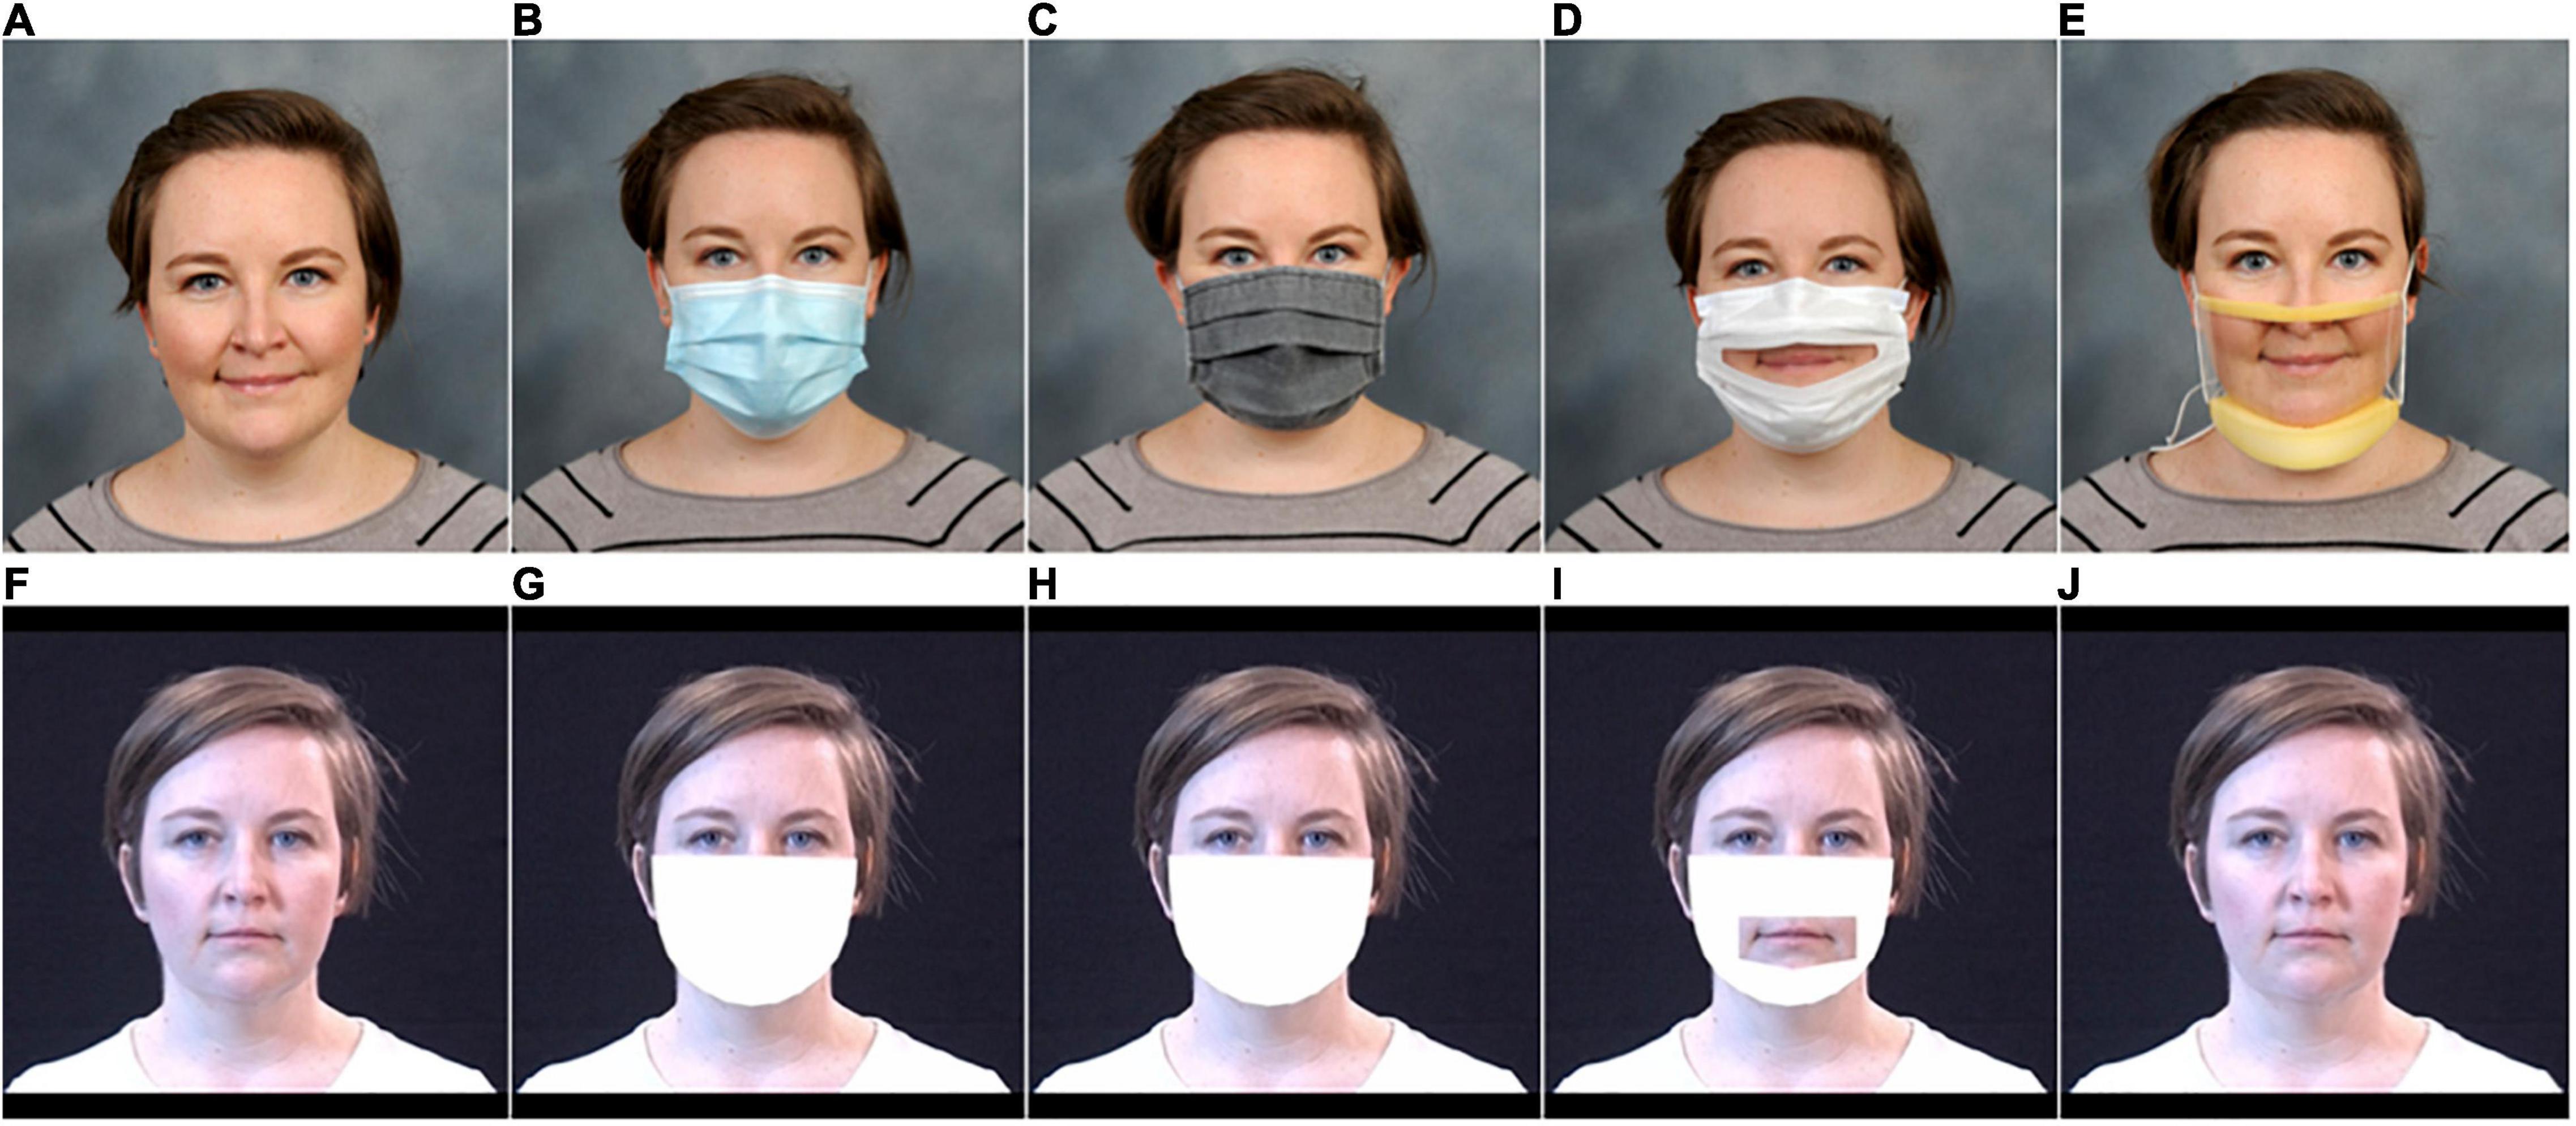 Understanding the Differences Between Face Masks & Shields